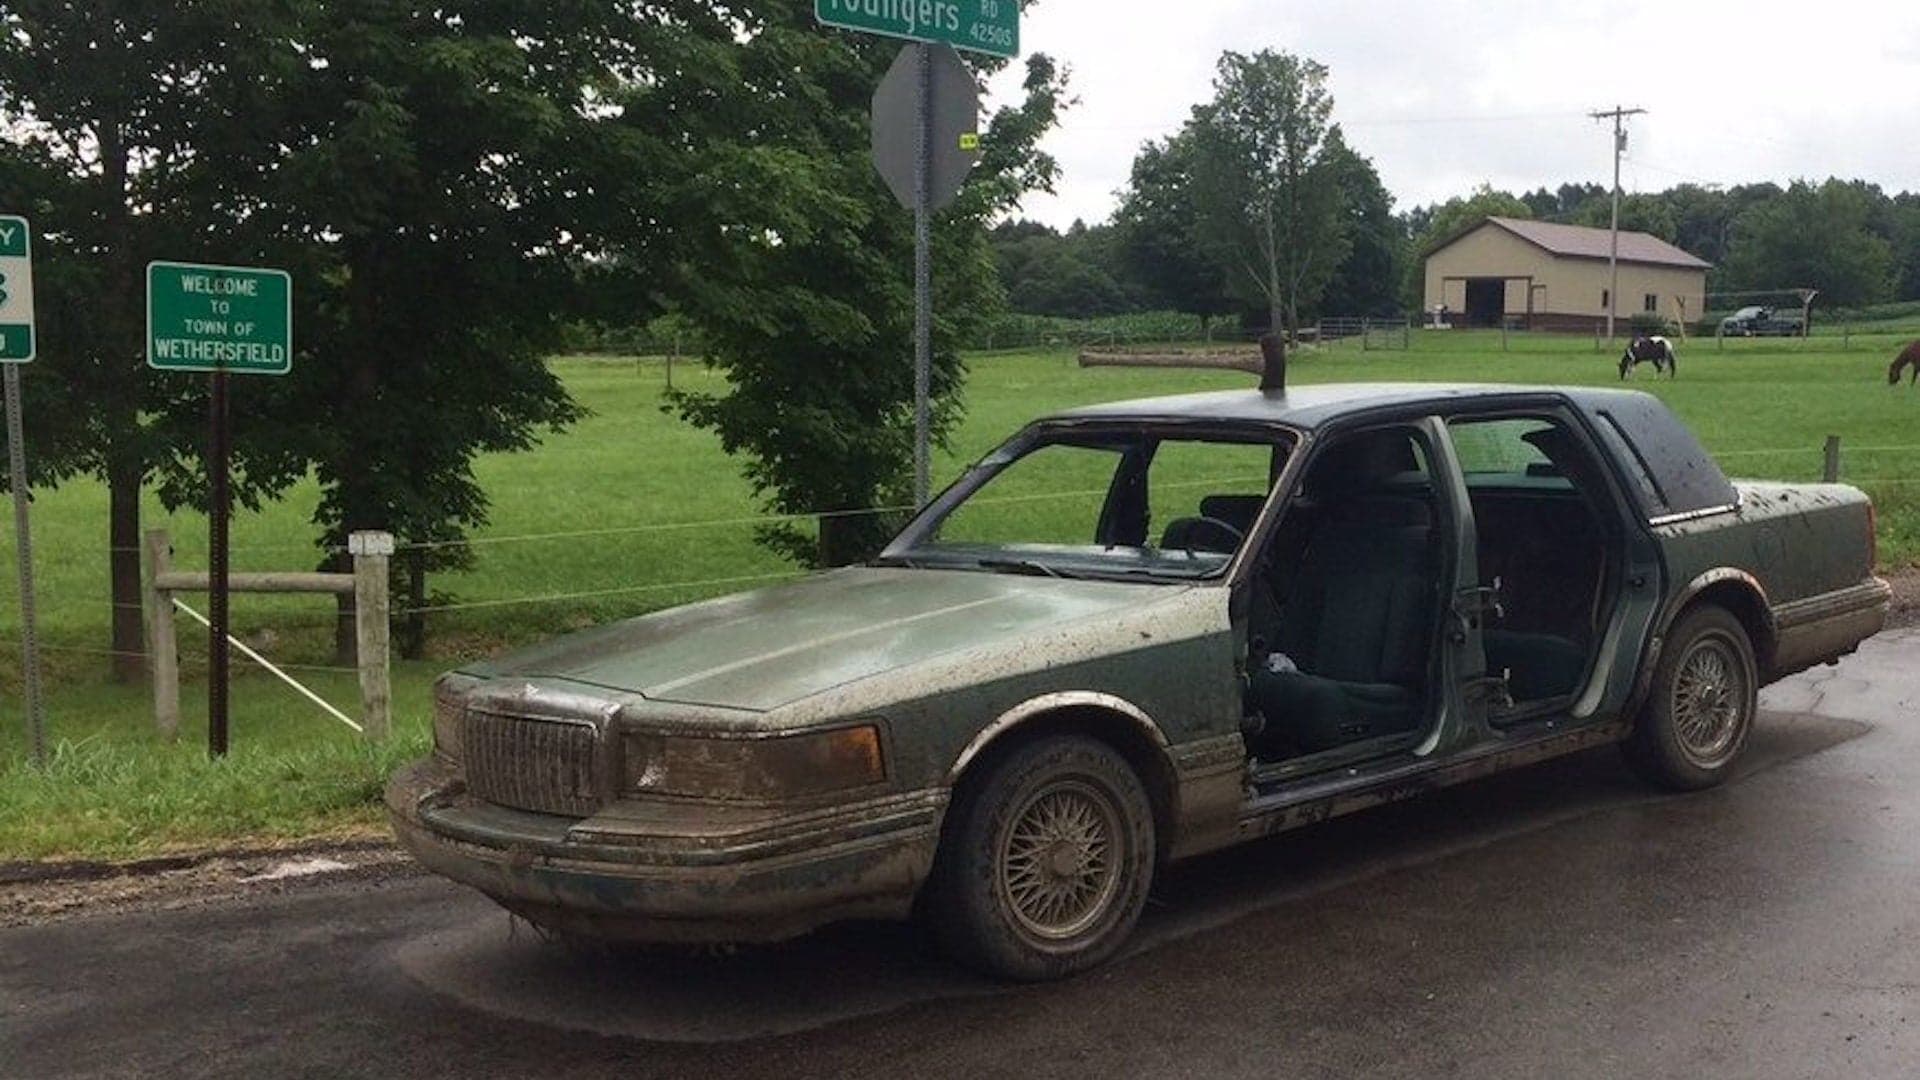 New York Man Arrested in Apocalyptic-Looking Lincoln Town Car With an Ax in Roof